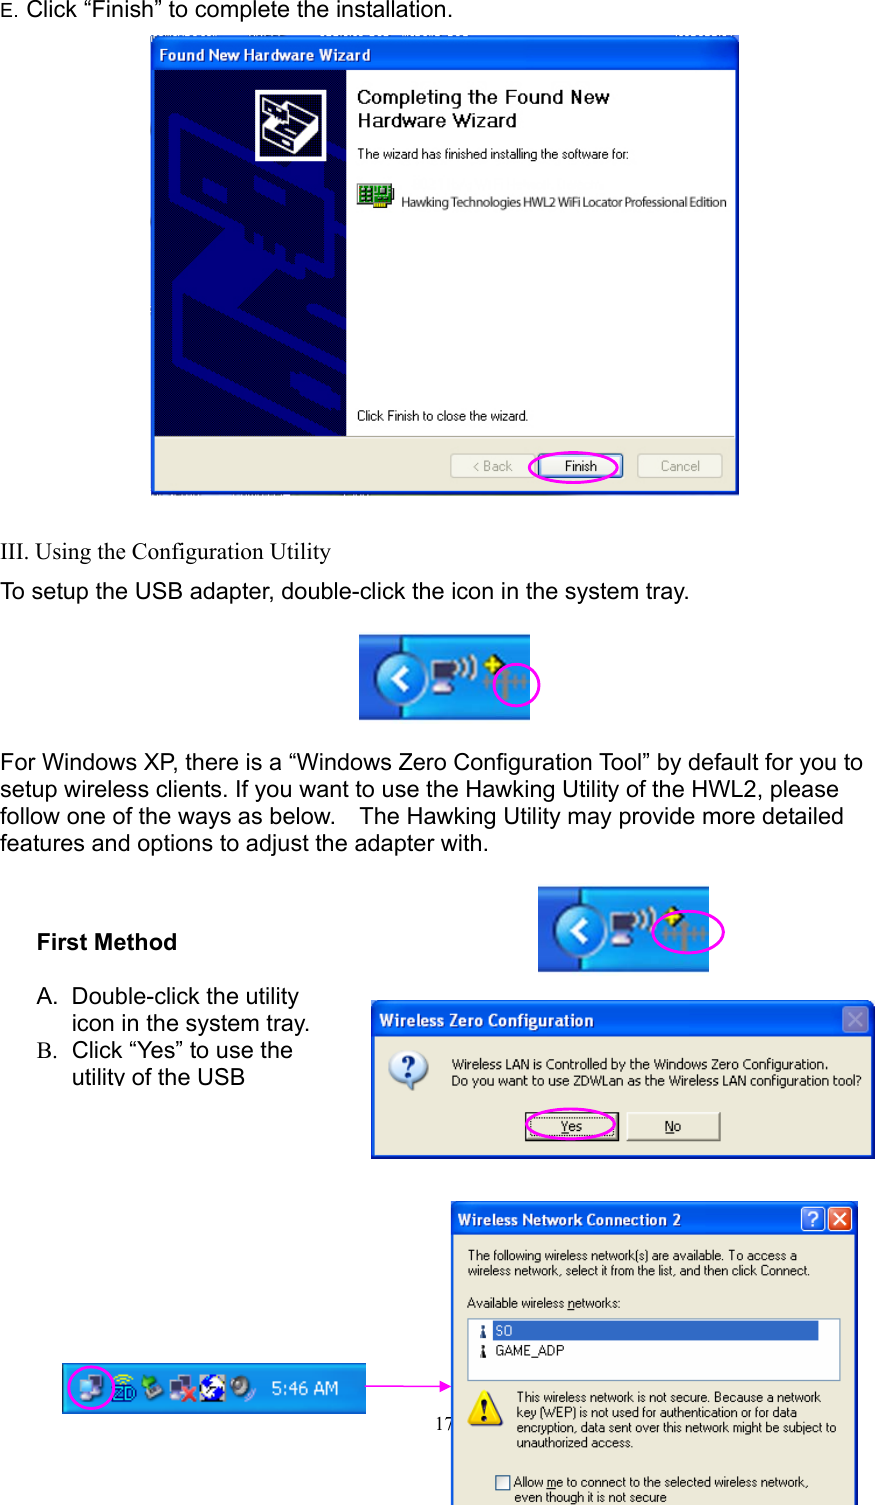  17 E. Click “Finish” to complete the installation.   III. Using the Configuration Utility To setup the USB adapter, double-click the icon in the system tray.    For Windows XP, there is a “Windows Zero Configuration Tool” by default for you to setup wireless clients. If you want to use the Hawking Utility of the HWL2, please follow one of the ways as below.    The Hawking Utility may provide more detailed features and options to adjust the adapter with.             First Method  A. Double-click the utility icon in the system tray. B.  Click “Yes” to use the utility of the USB  